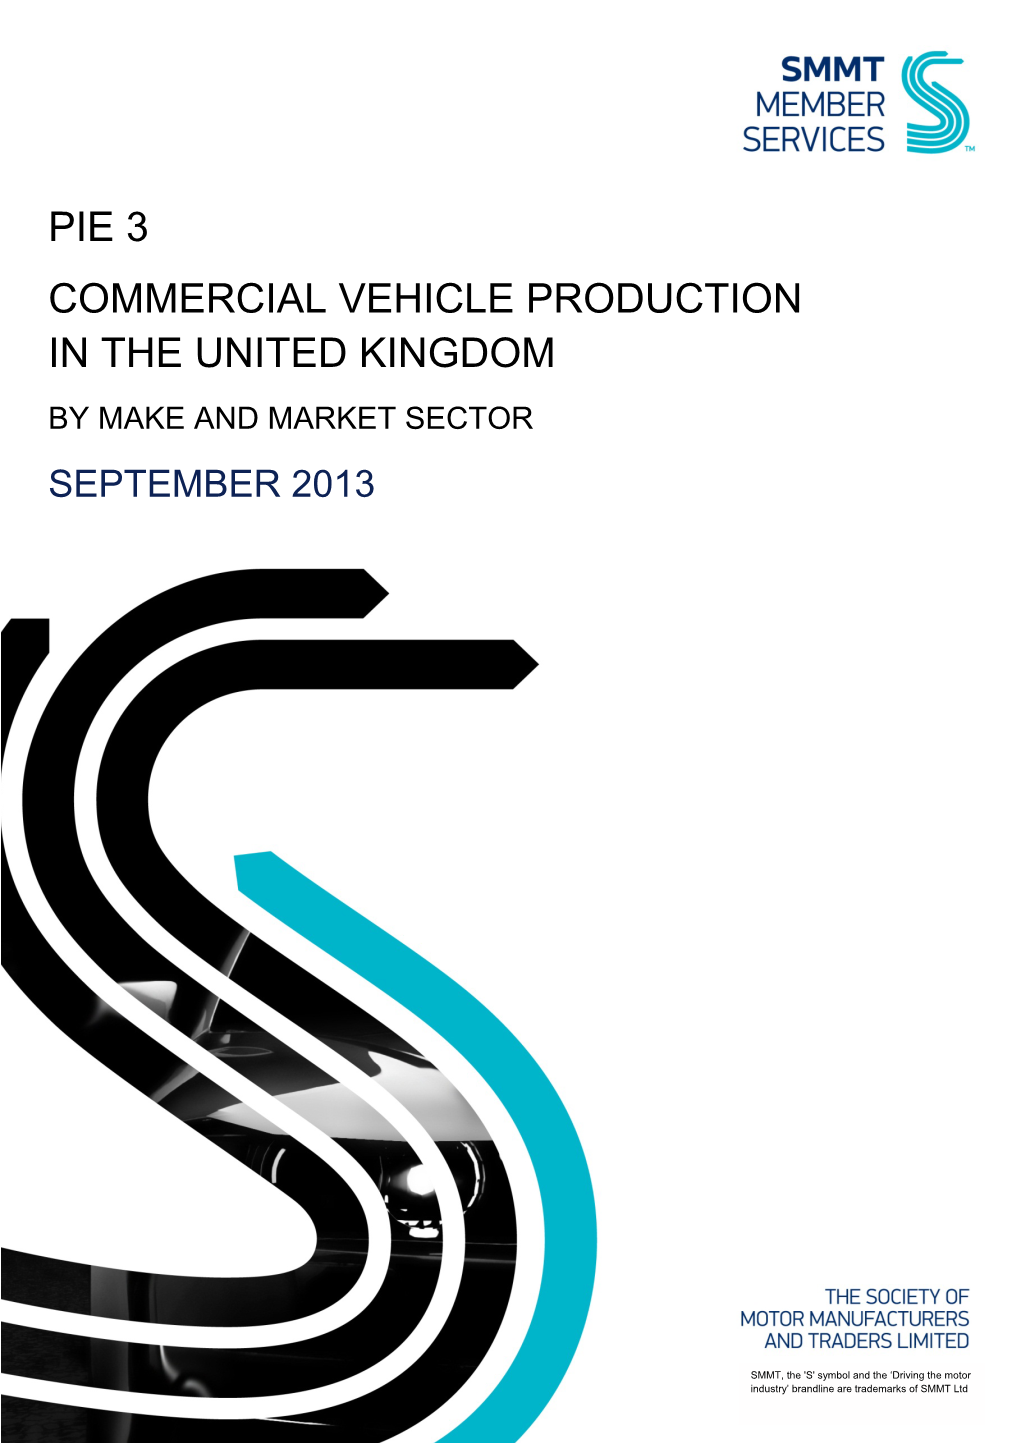 Pie 3 Commercial Vehicle Production in the United Kingdom by Make and Market Sector